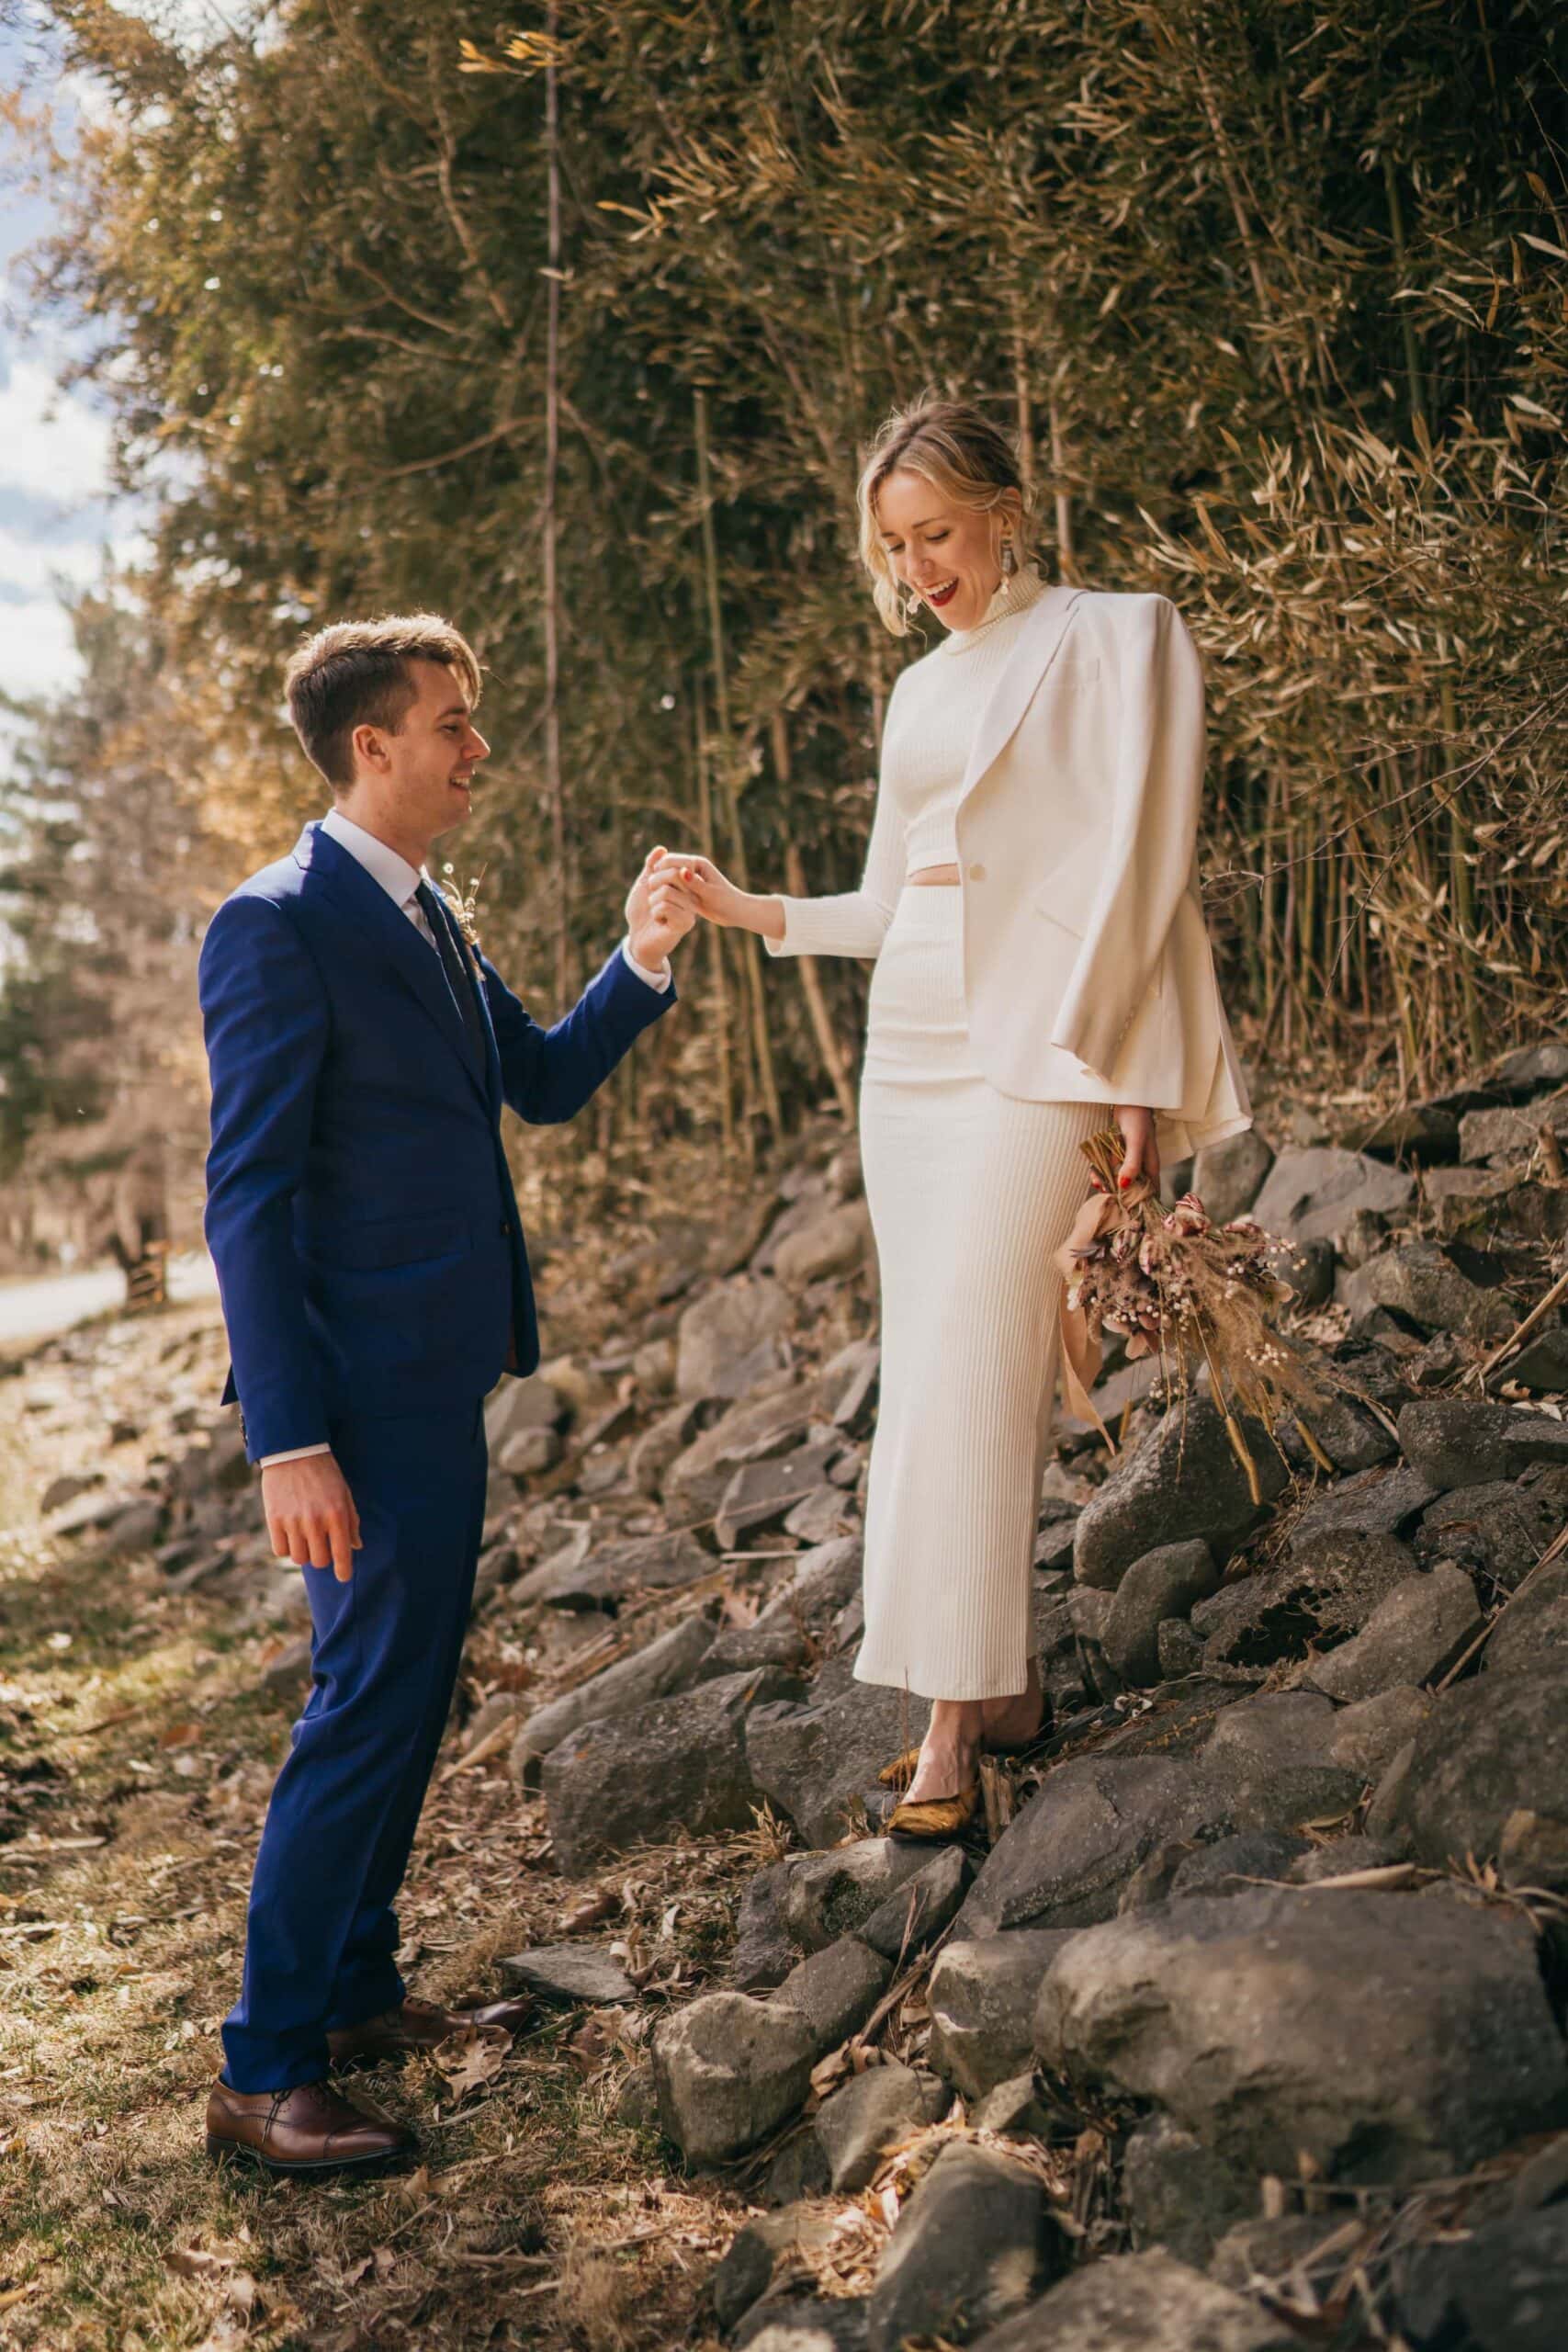 Bride stands on rocks and smiles, groom holds her hand as she walks down.